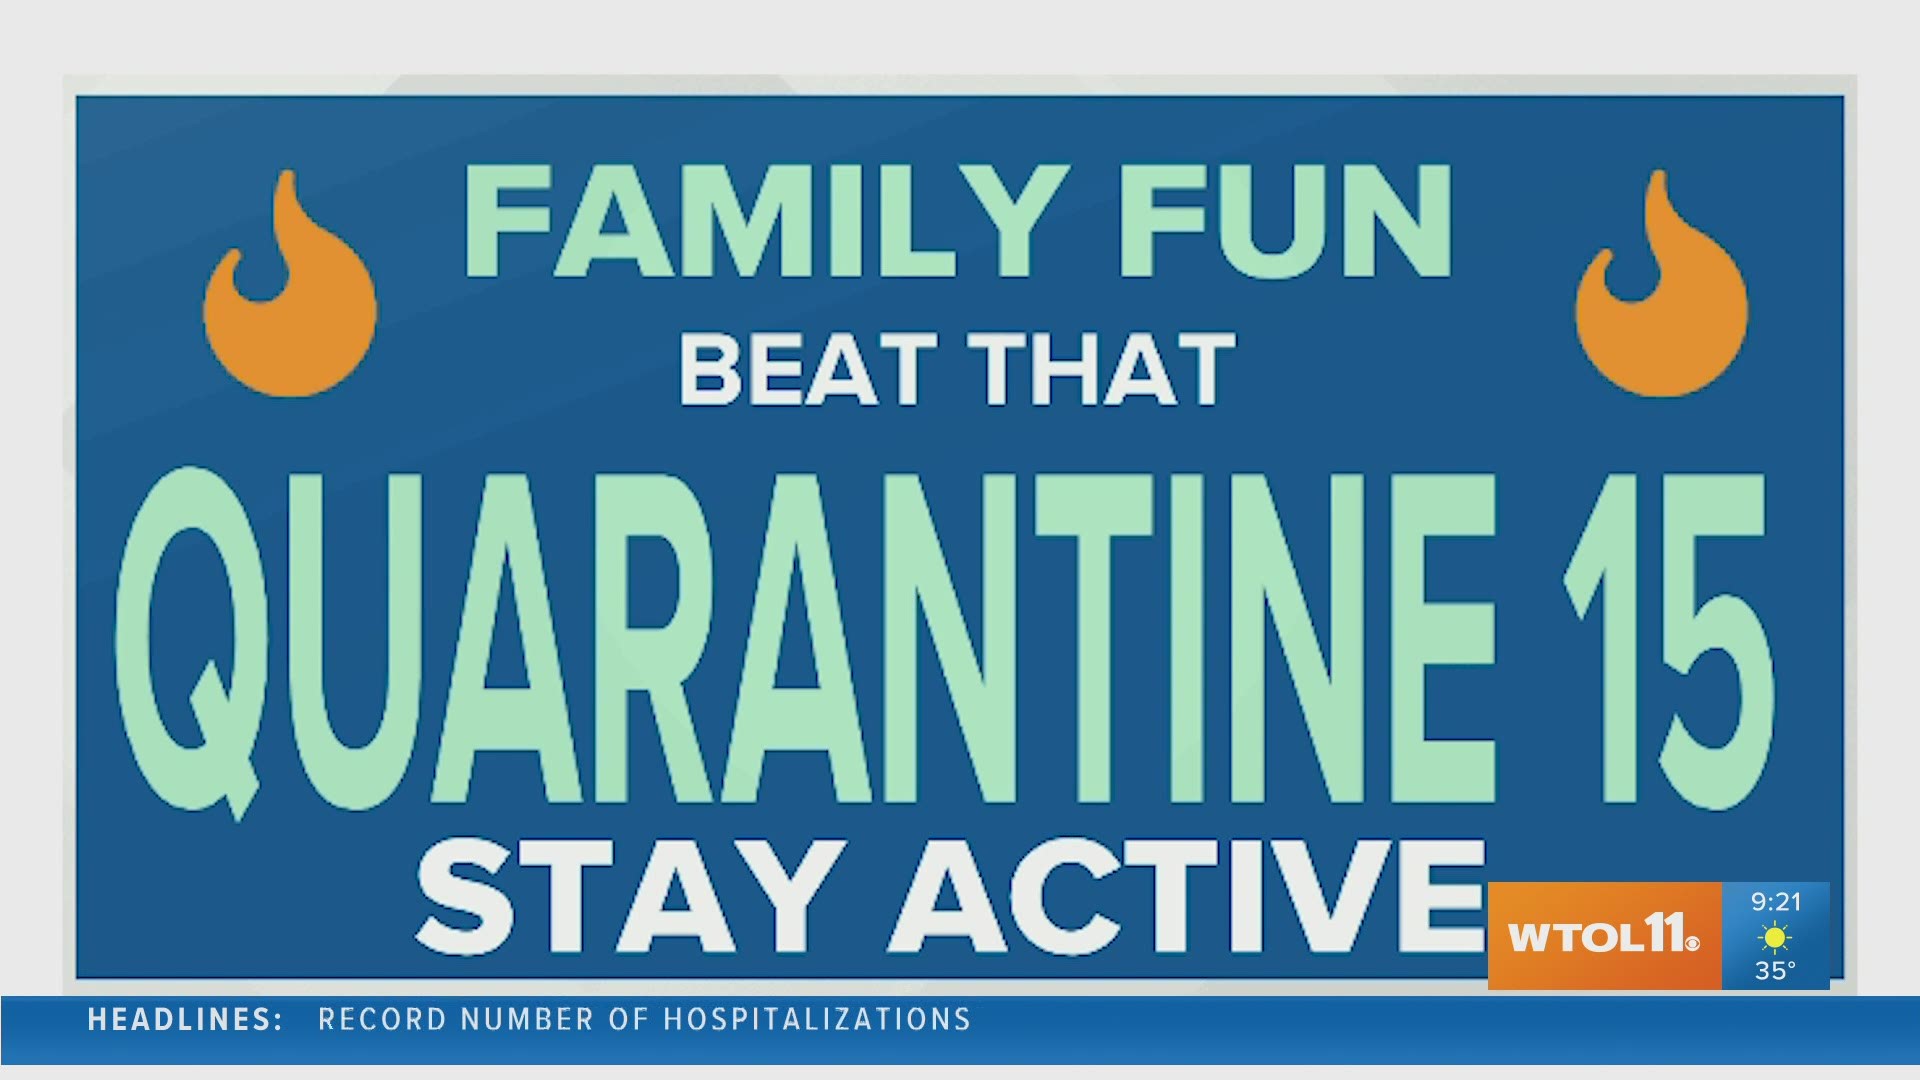 Stay on track with these fitness tips so you don't gain the Quarantine 15!